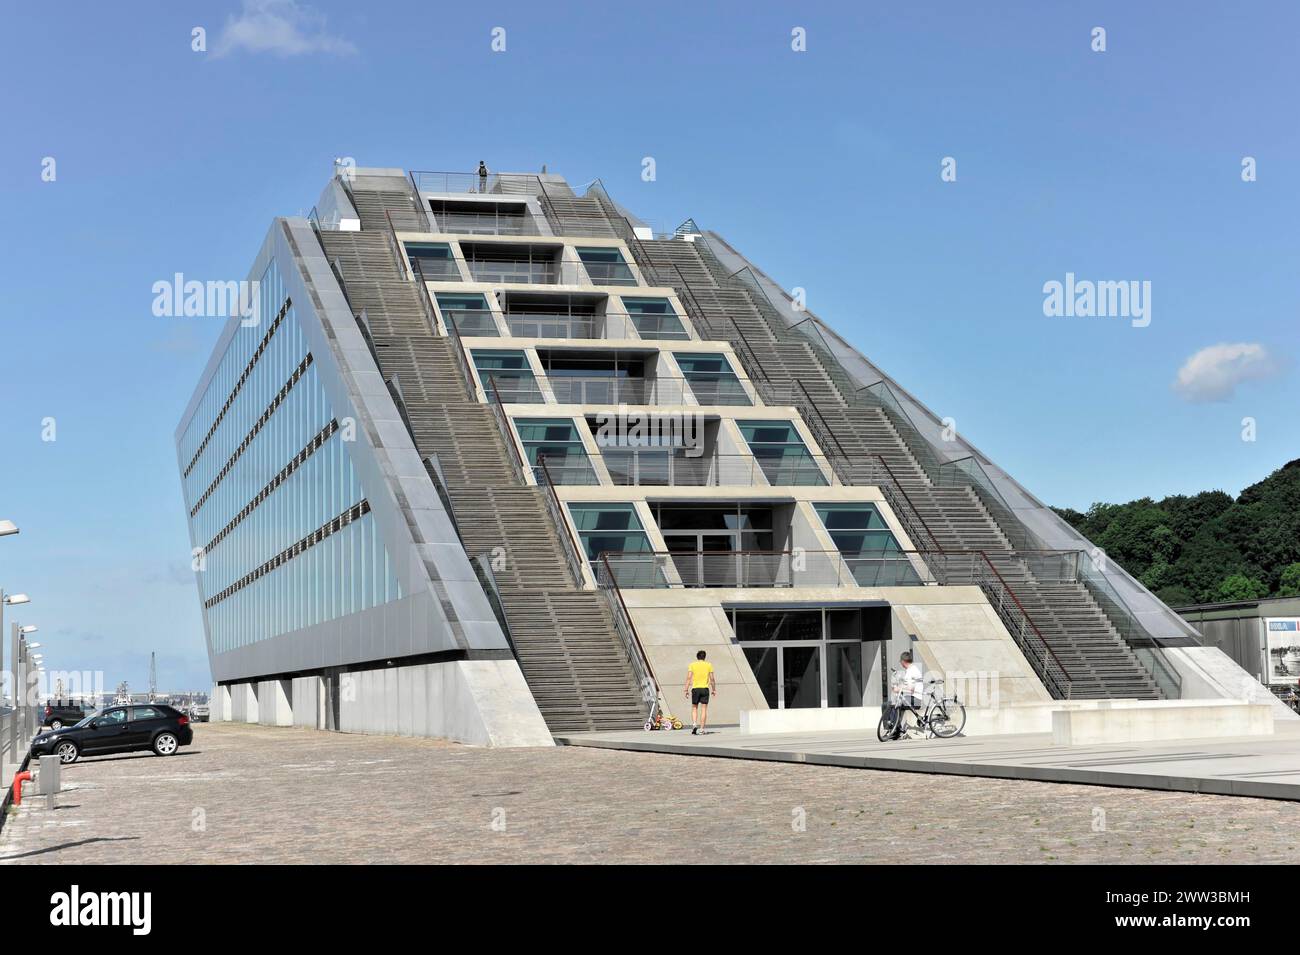 A modern office building with a unique, quirky design, Hamburg, Hanseatic City of Hamburg, Germany Stock Photo